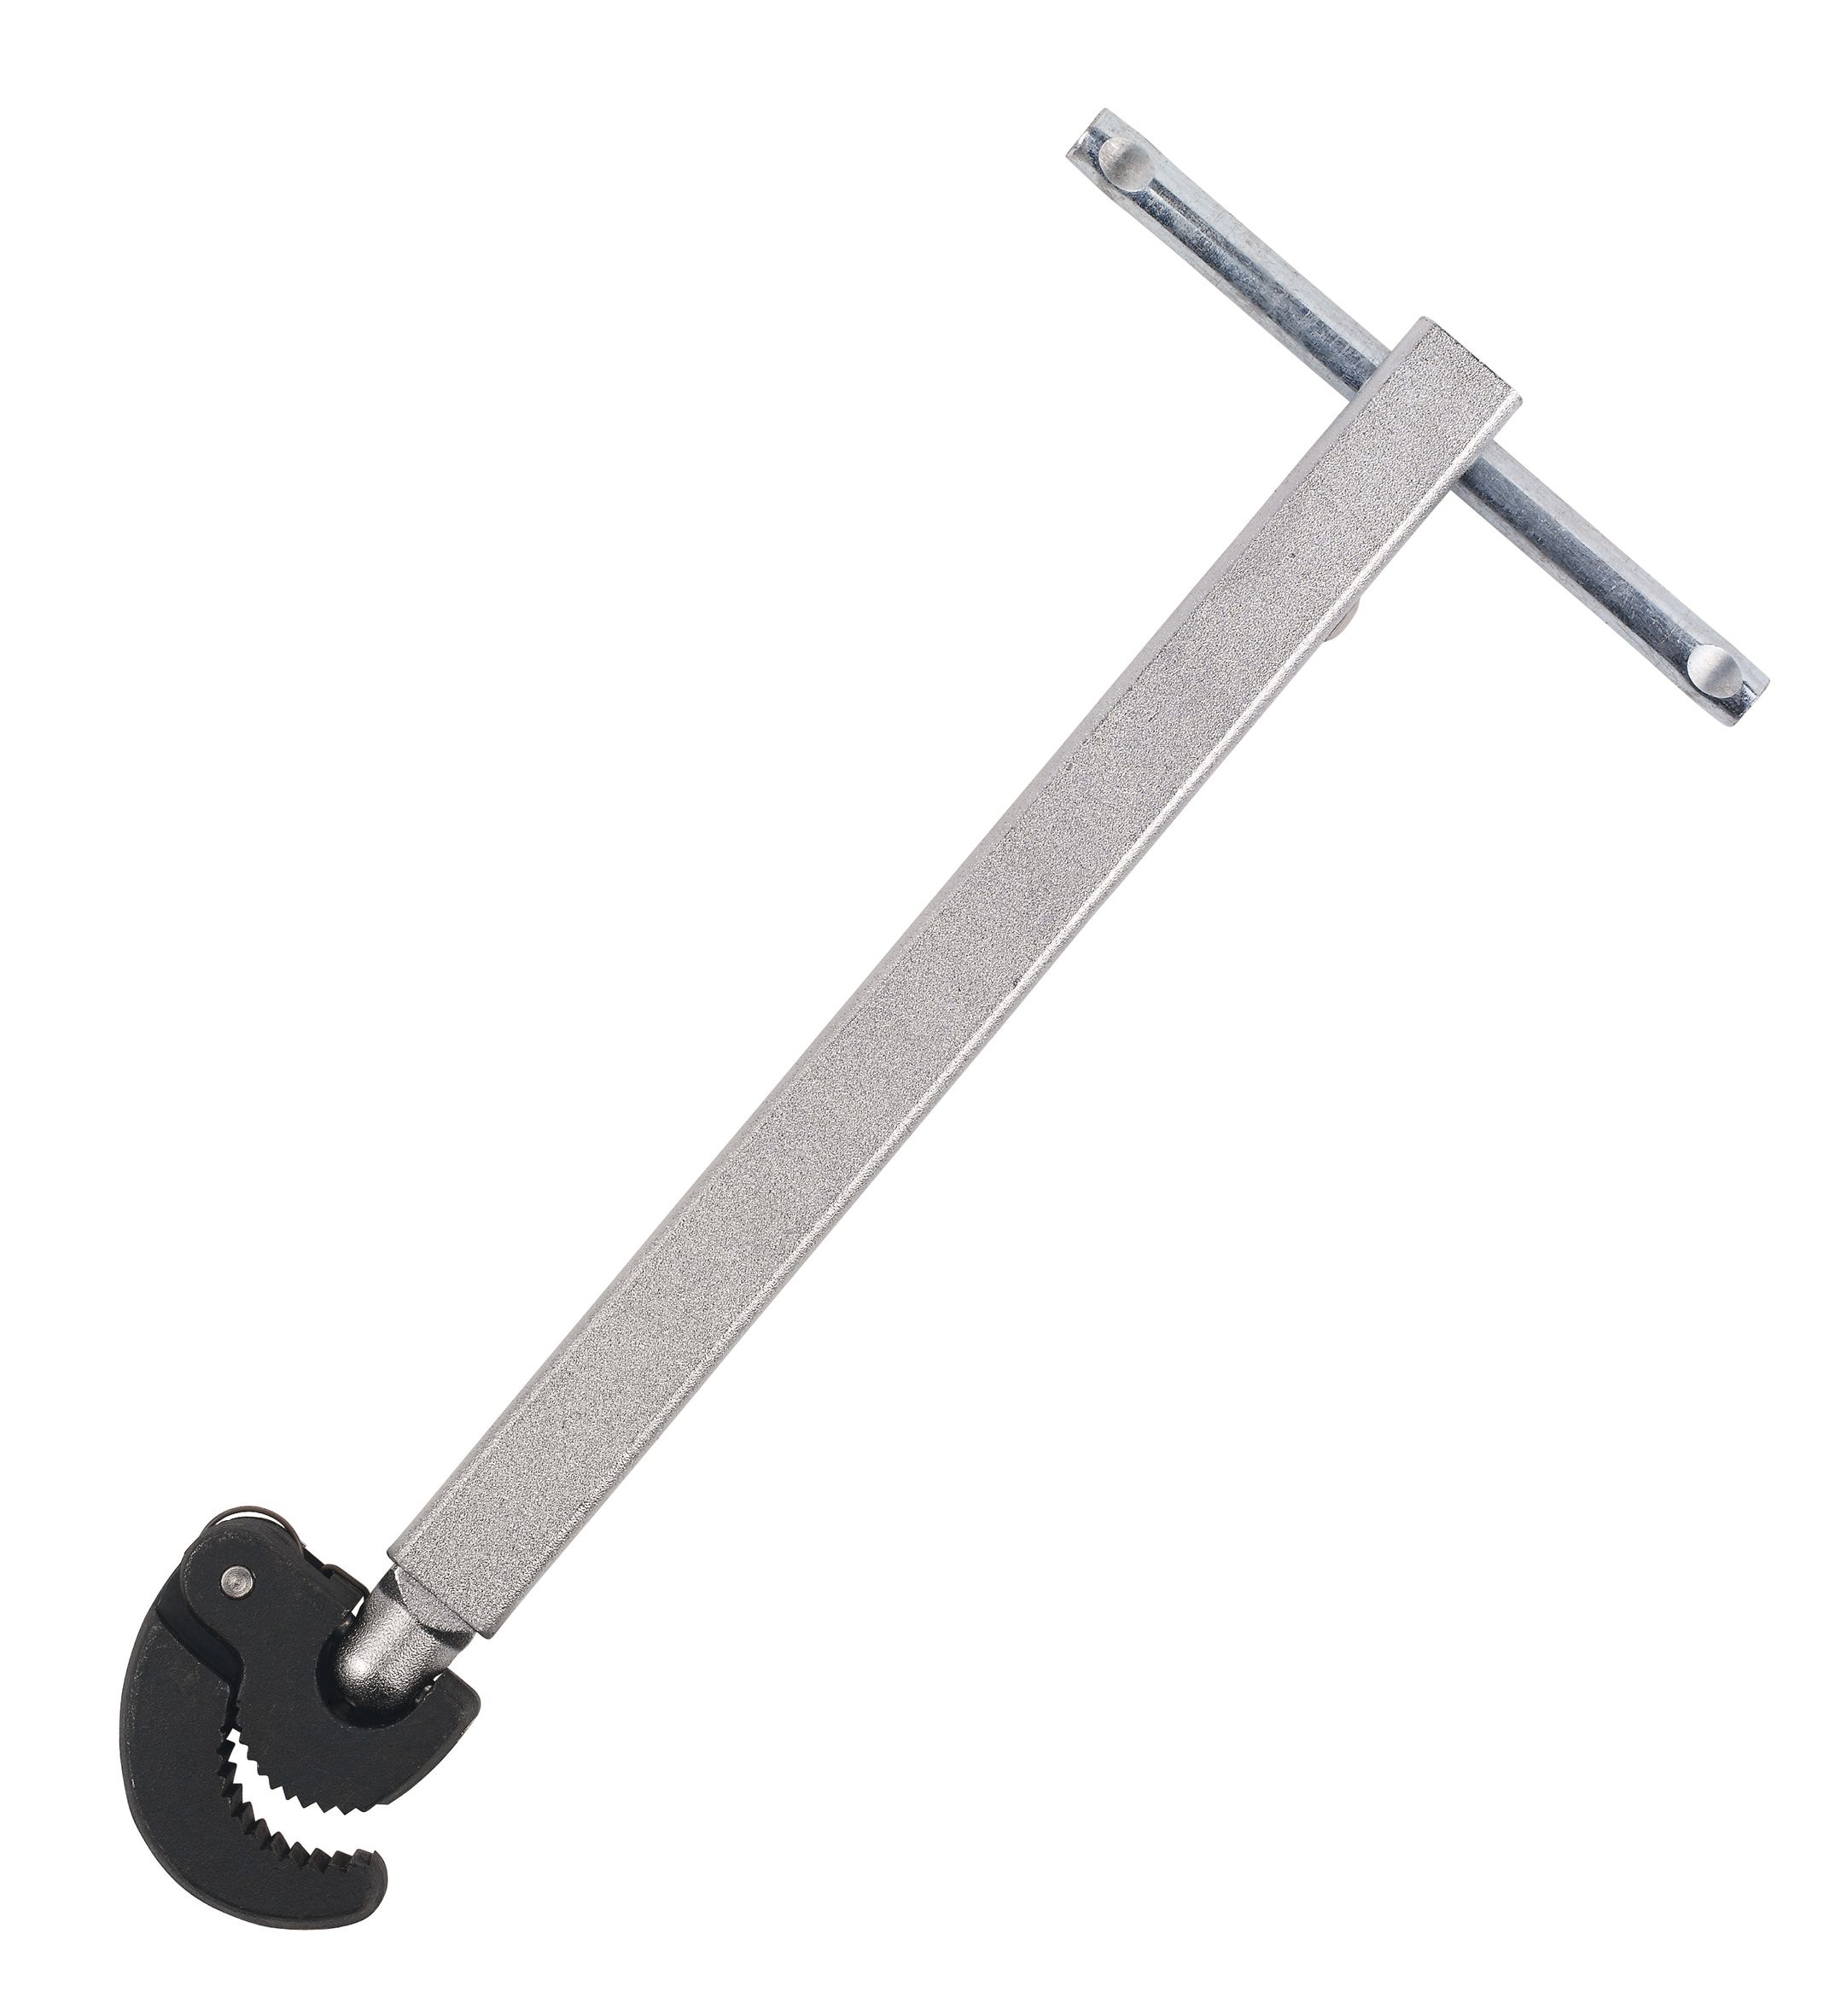 Rothenberger 32mm Telescopic Basin Wrench